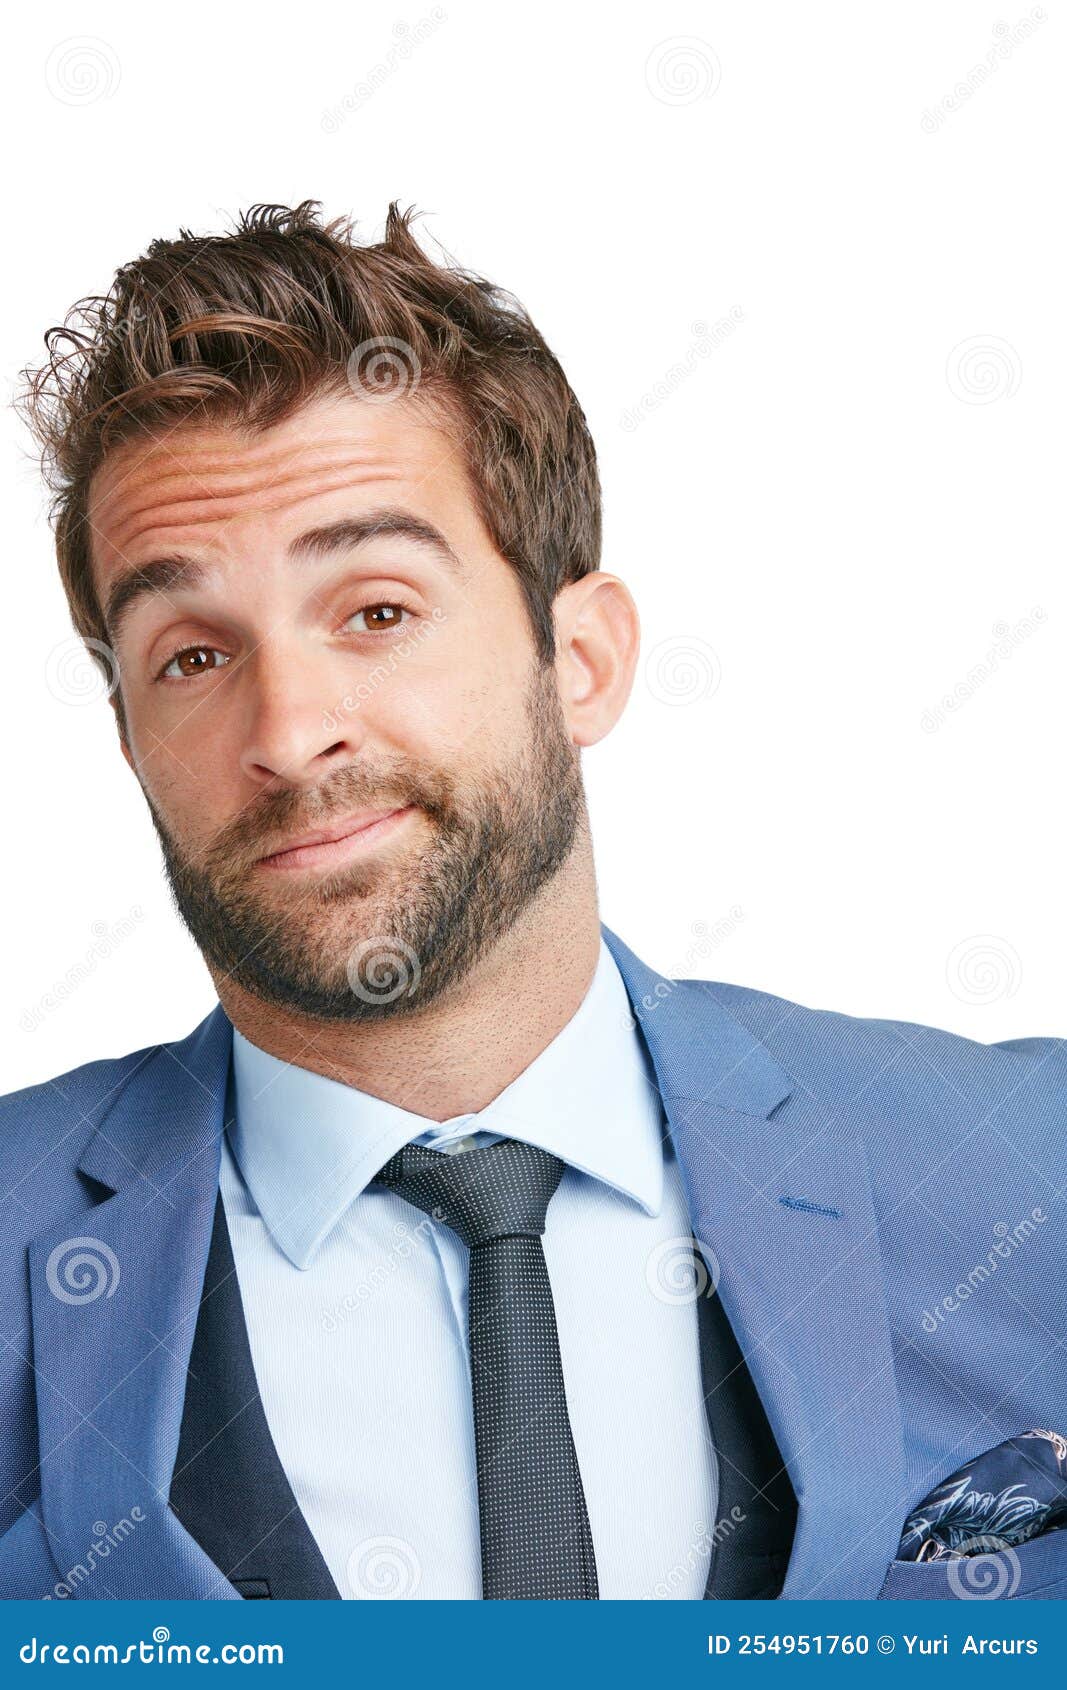 nothing kills a career like complacency. studio shot of a handsome businessman looking complacent against a white